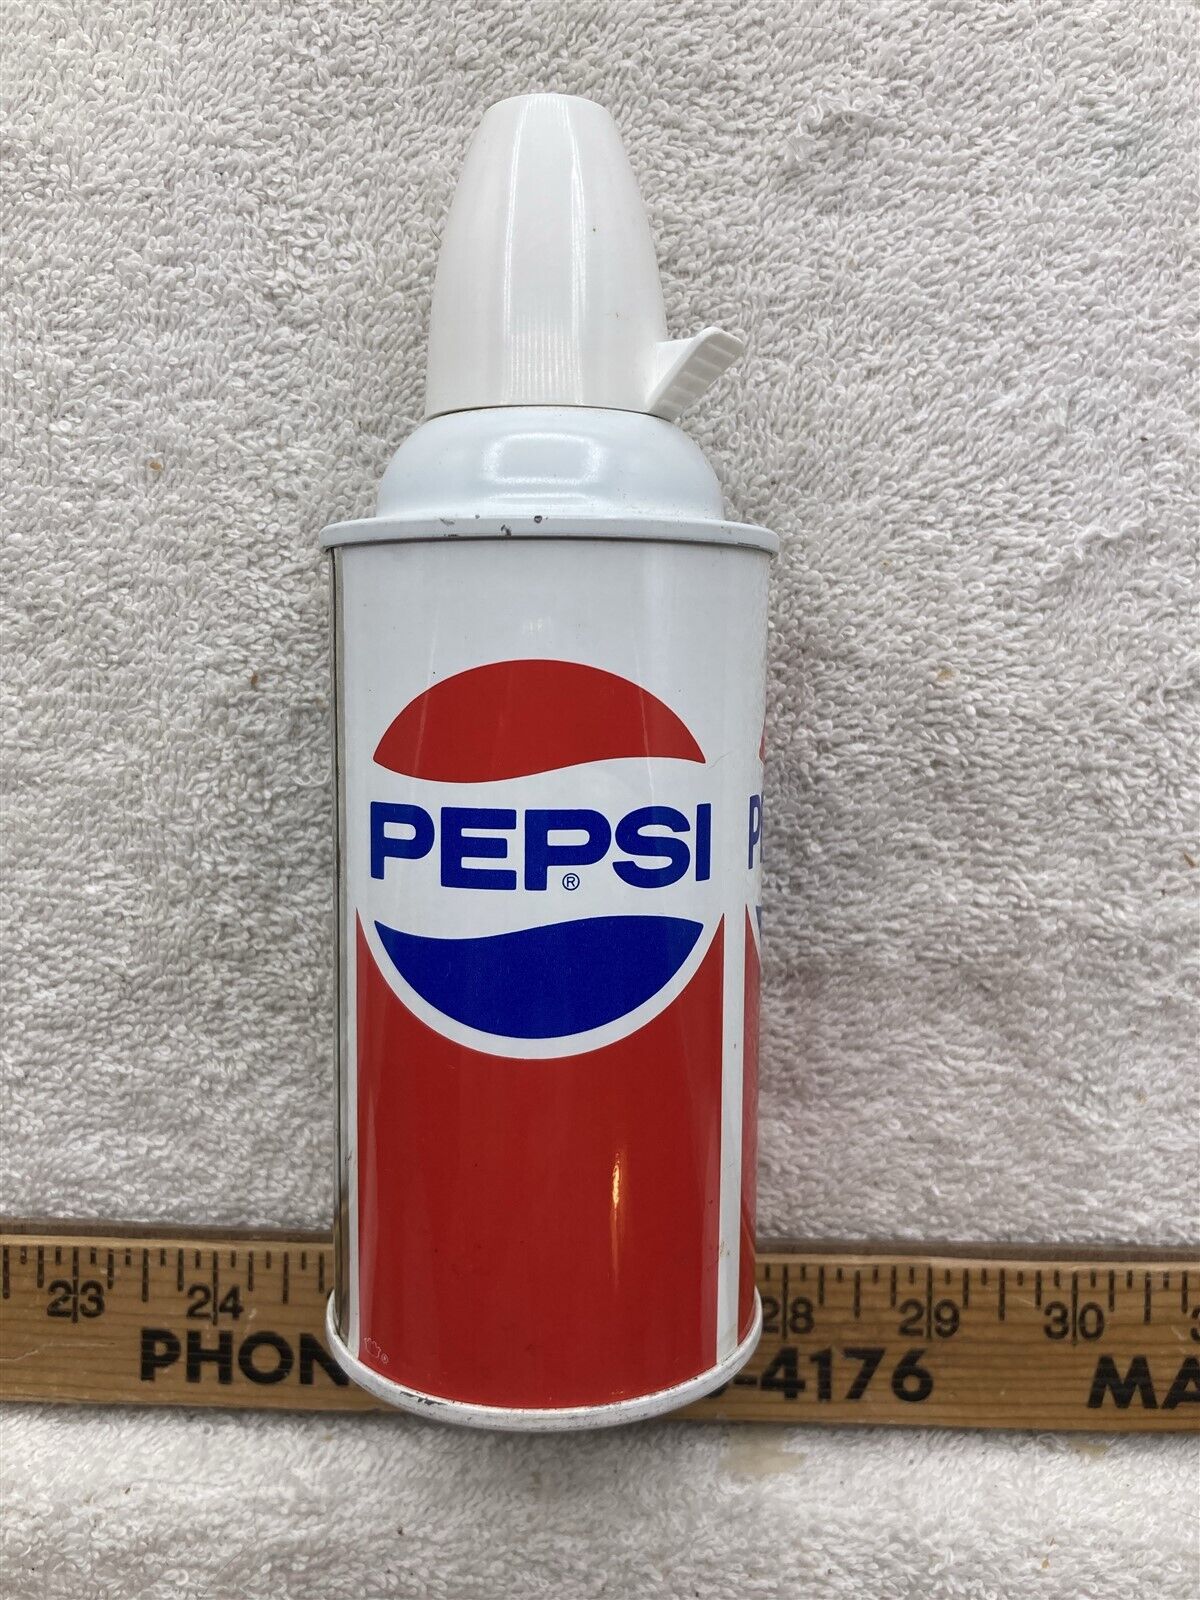 1985 Pepsi Cola Young Astronauts Space Soda Pop First Flight NASA Can Vintage